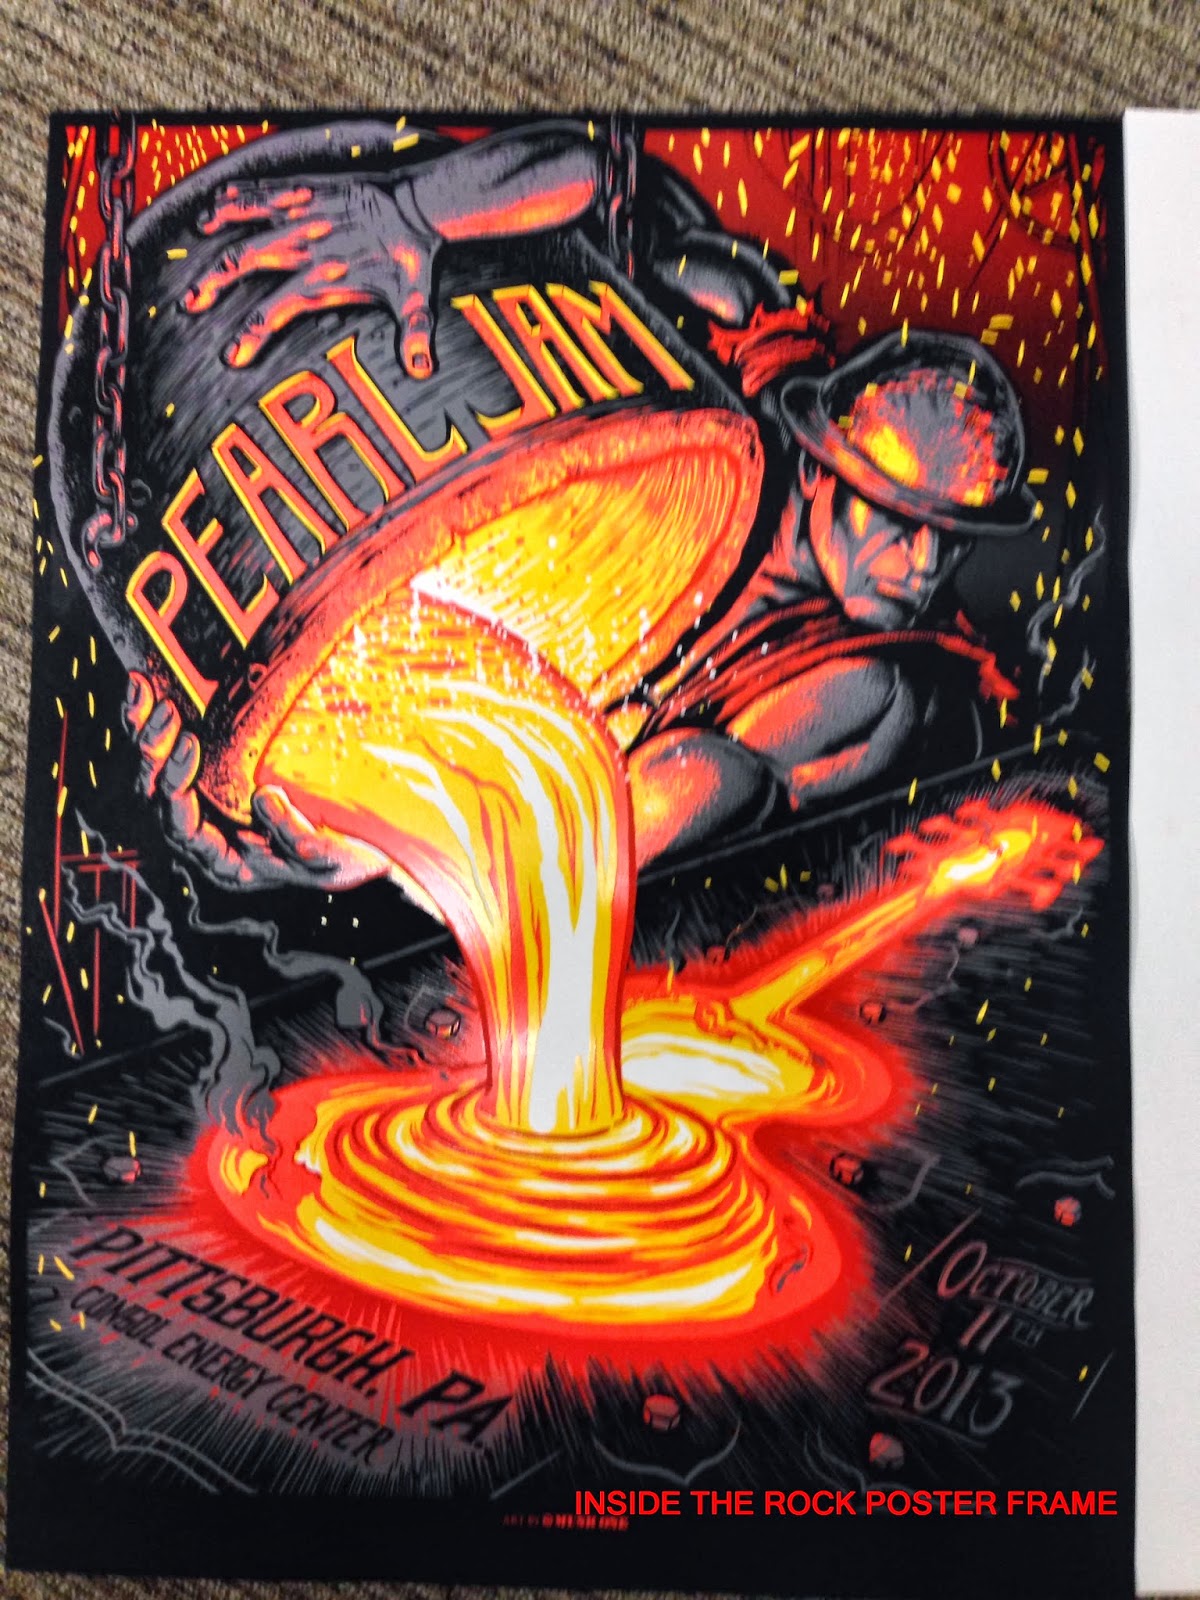 INSIDE THE ROCK POSTER FRAME BLOG: Pearl Jam Pittsburgh Munk One ...